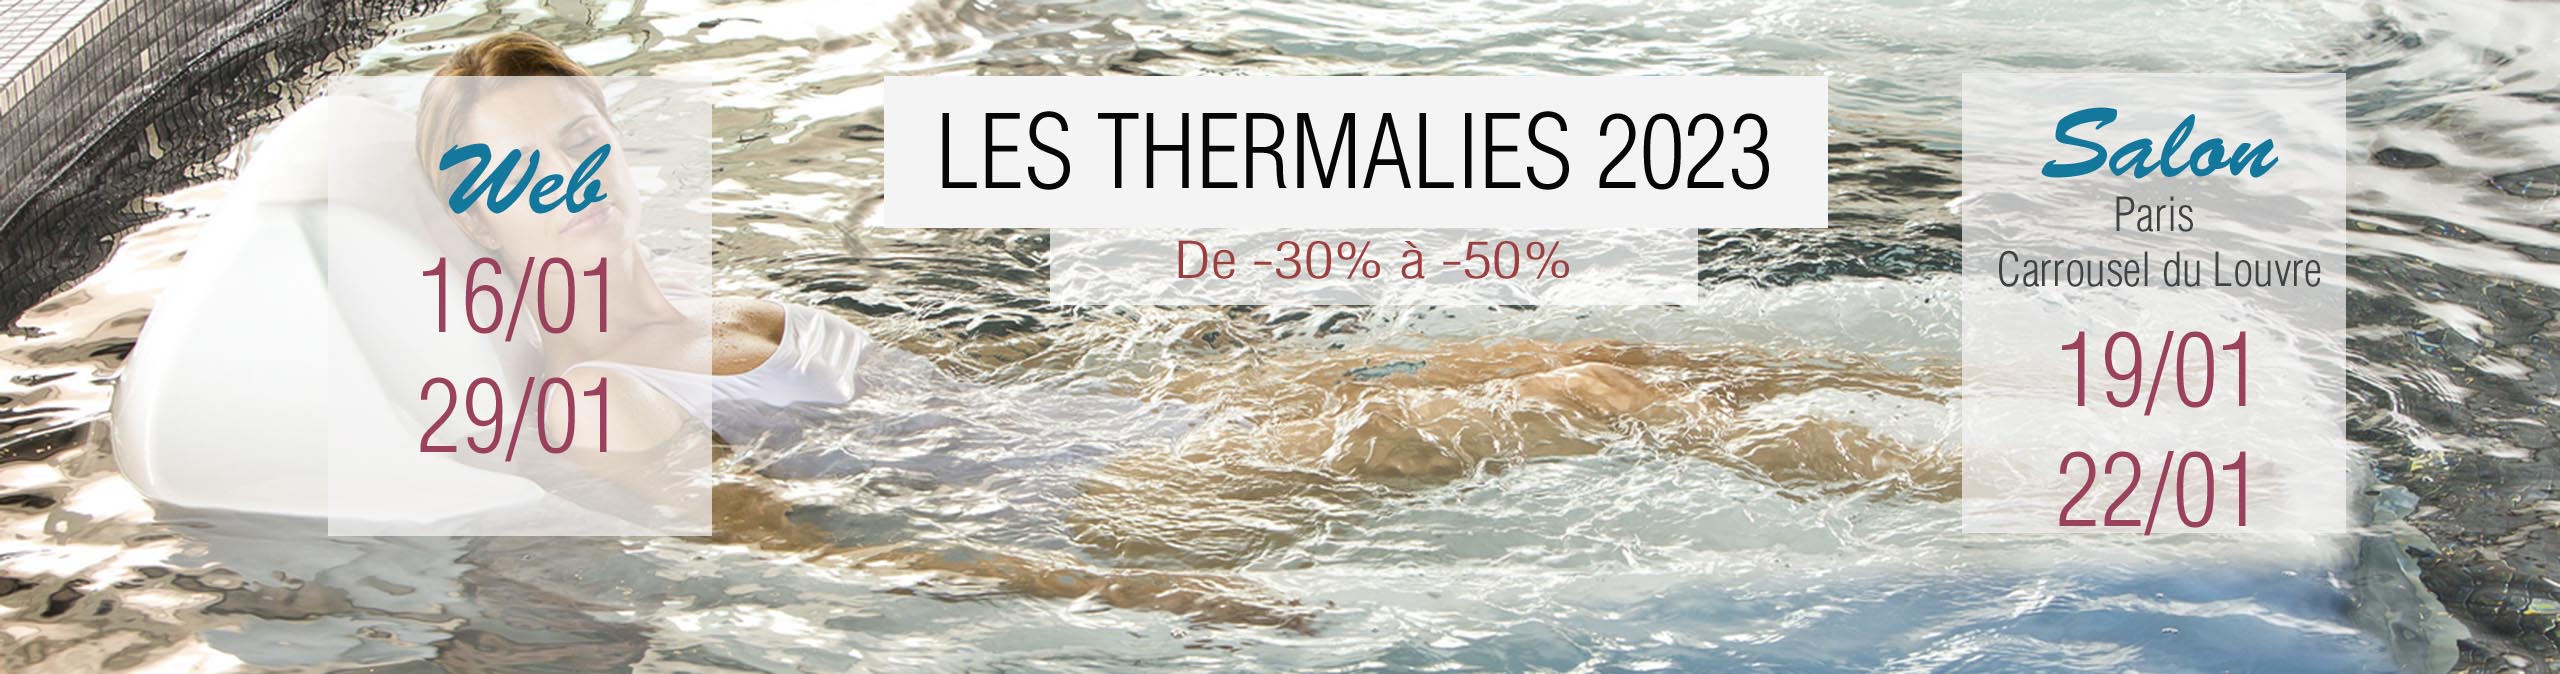 LES THERMALIES 2023